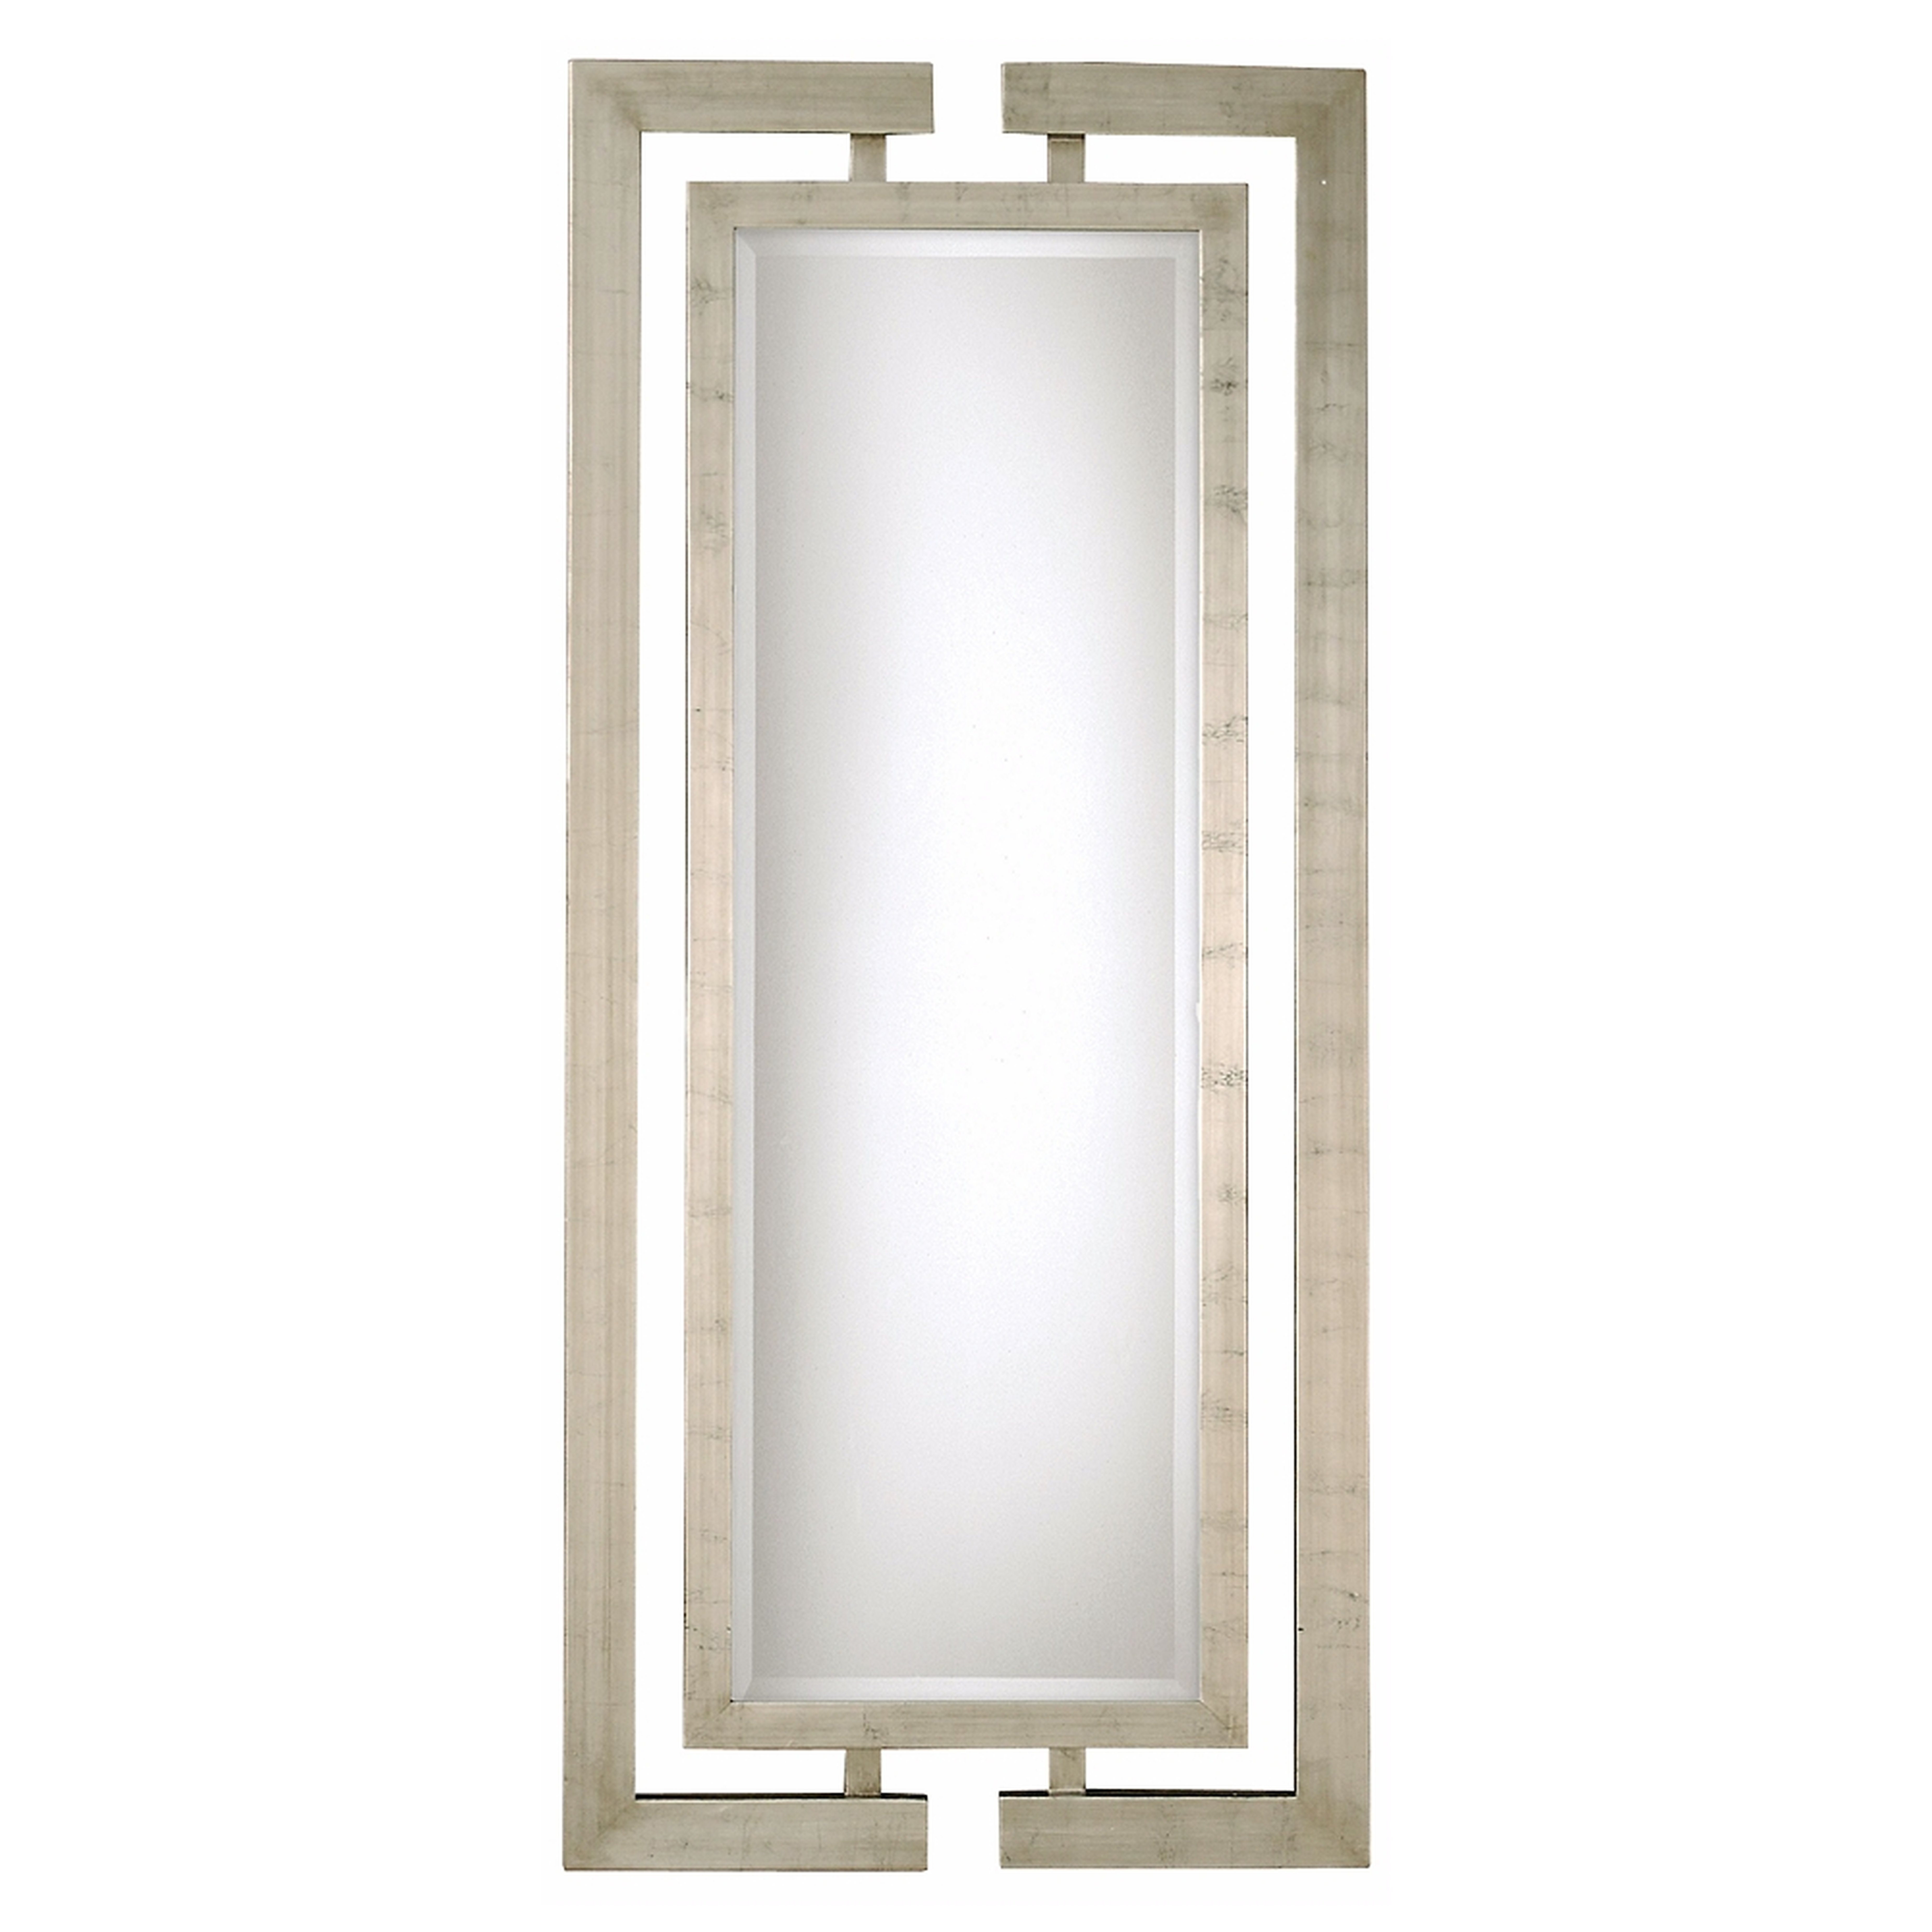 Uttermost Jamal Ash Wall Mirror - Style # 58215 - Lamps Plus